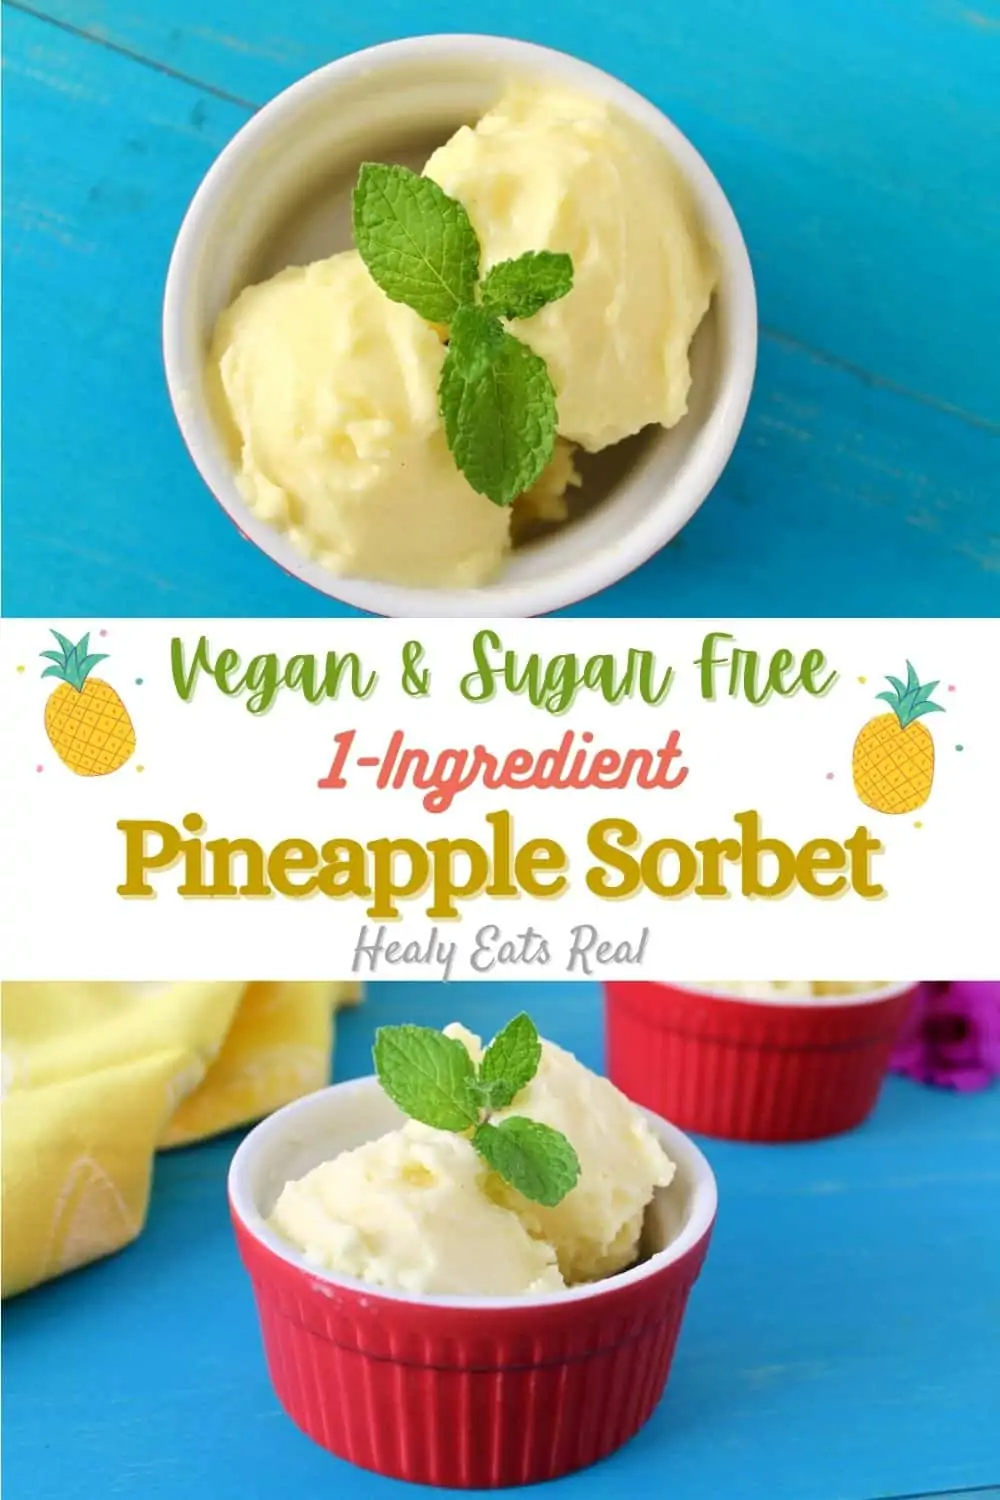 Pineapple Sorbet with 1 Ingredient